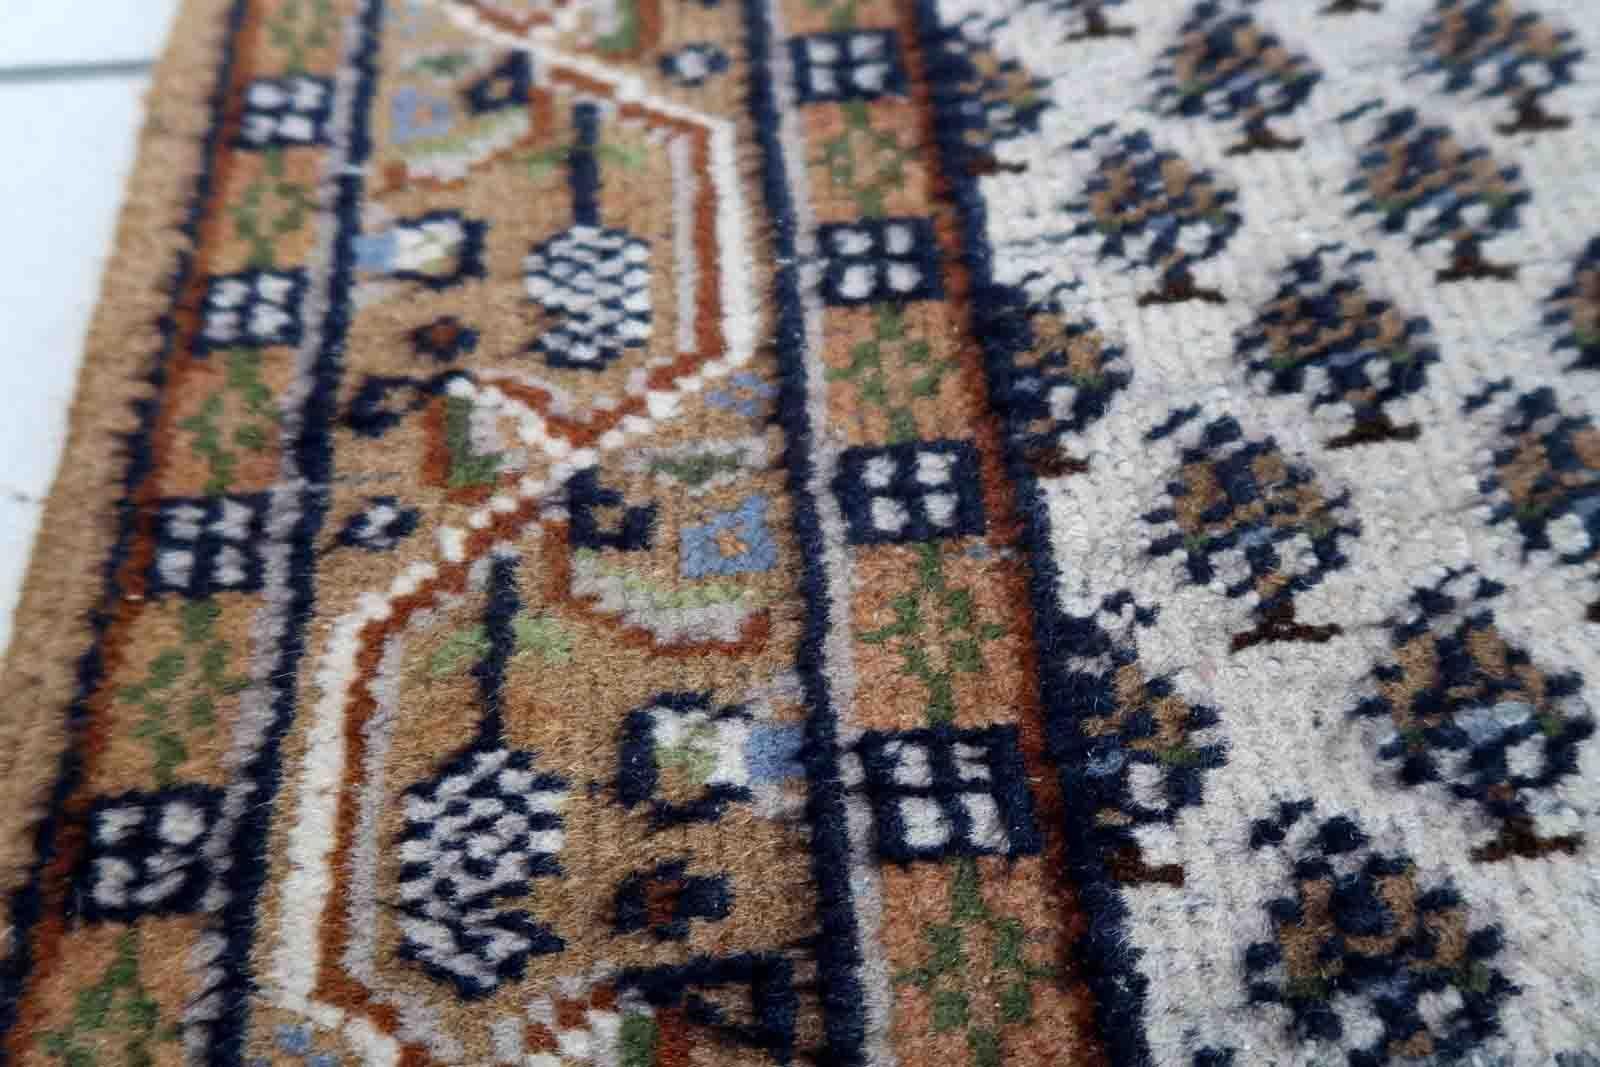 Handmade vintage Indian Seraband runner in original good condition. The rug has been made in traditional pattern, it is from circa1970s. 

-condition: original good,

-circa: 1970s,

-size: 2.3' x 8.7' (71cm x 266cm),

-Material: